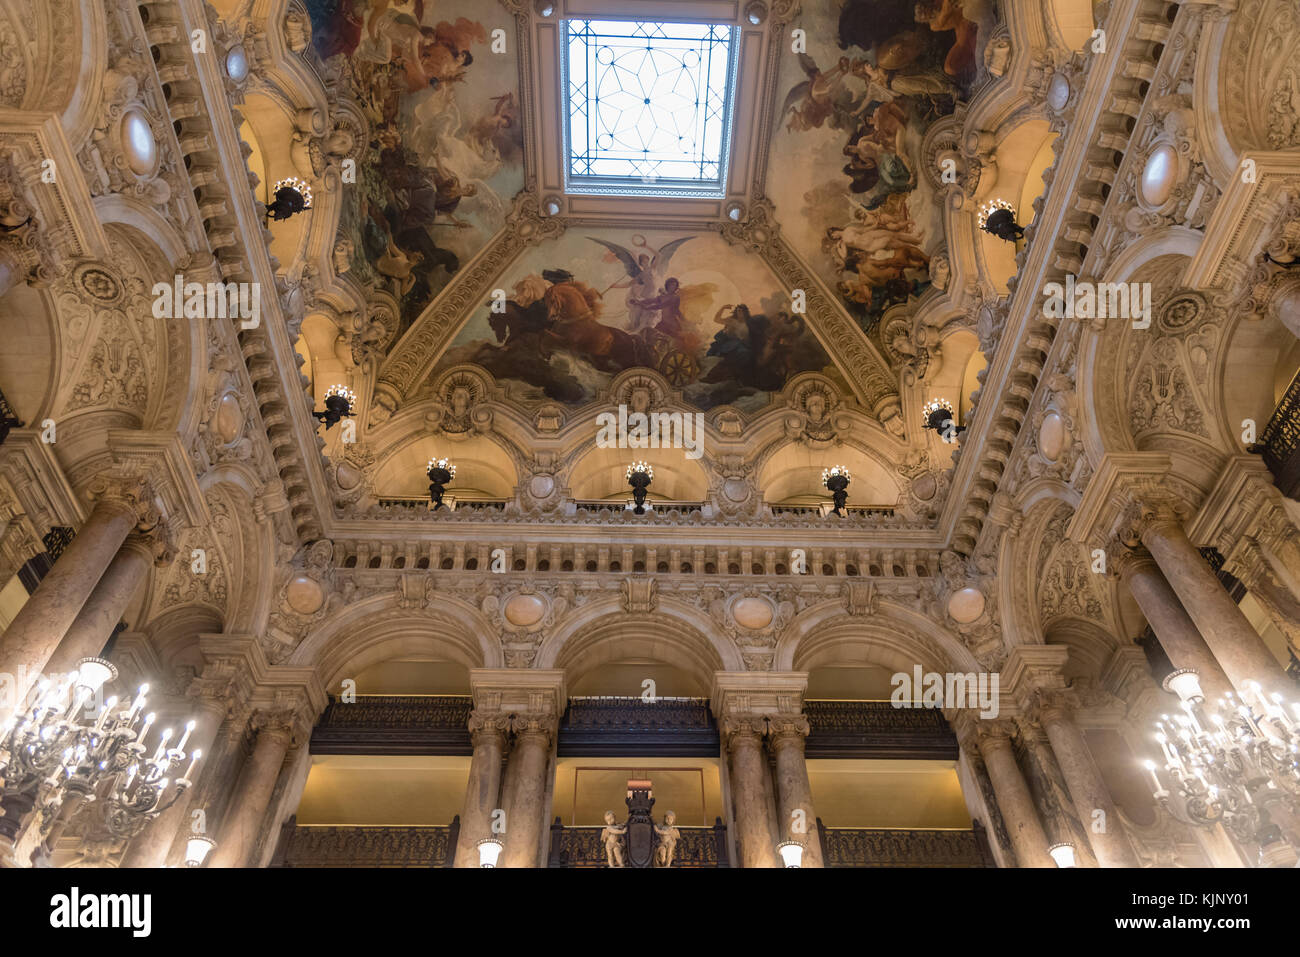 The Ceiling Of The Grand Staircase Of The Palais Garnier